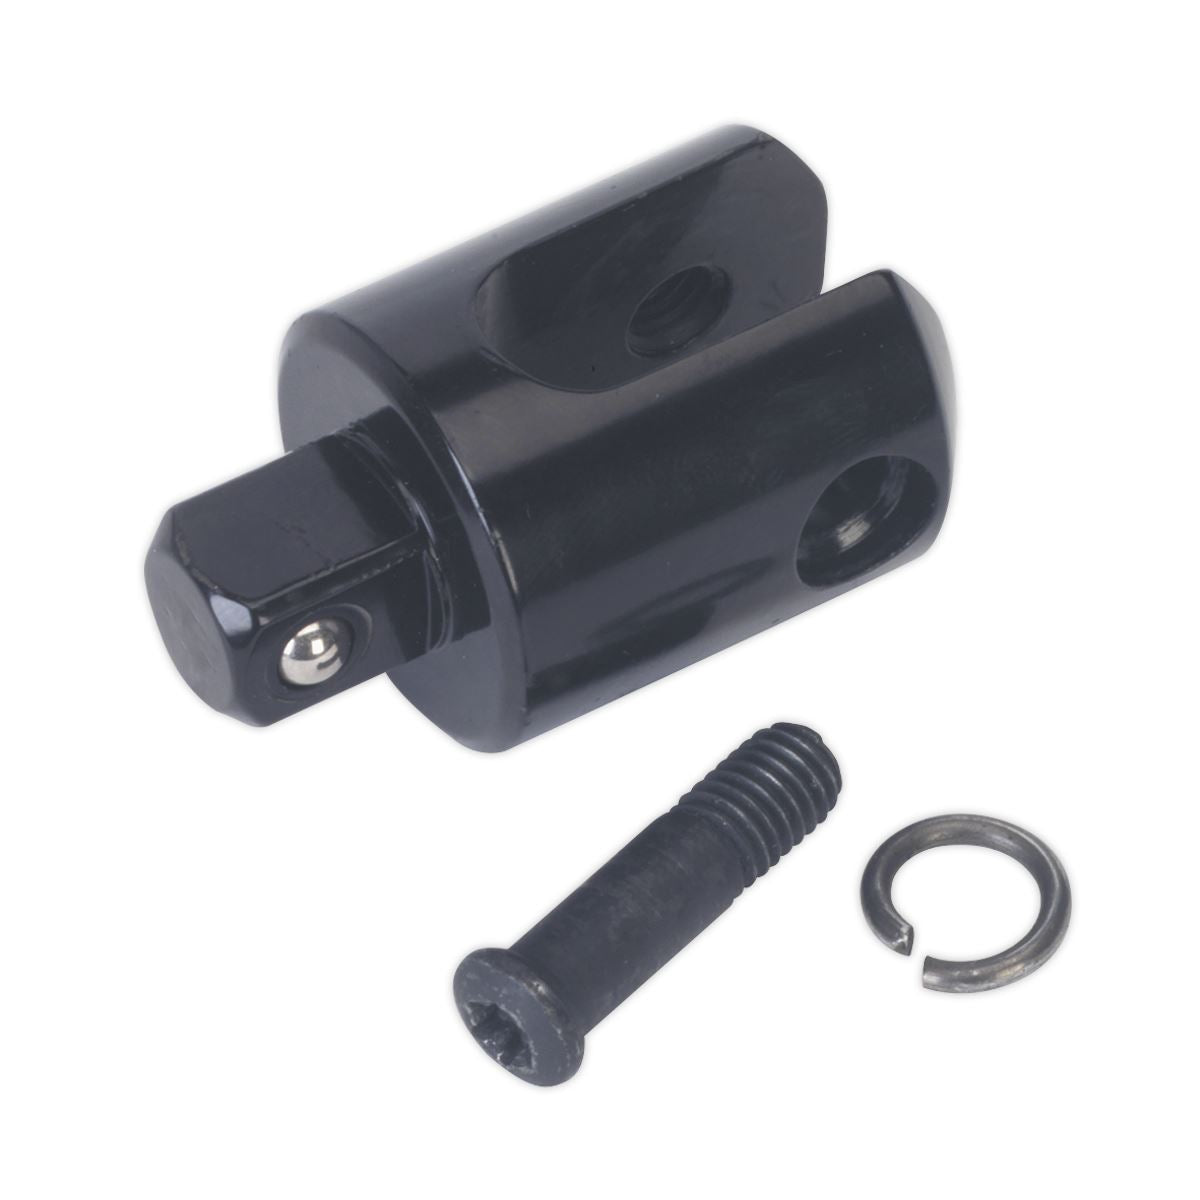 Sealey Premier Knuckle 1/2"Sq Drive for AK7315